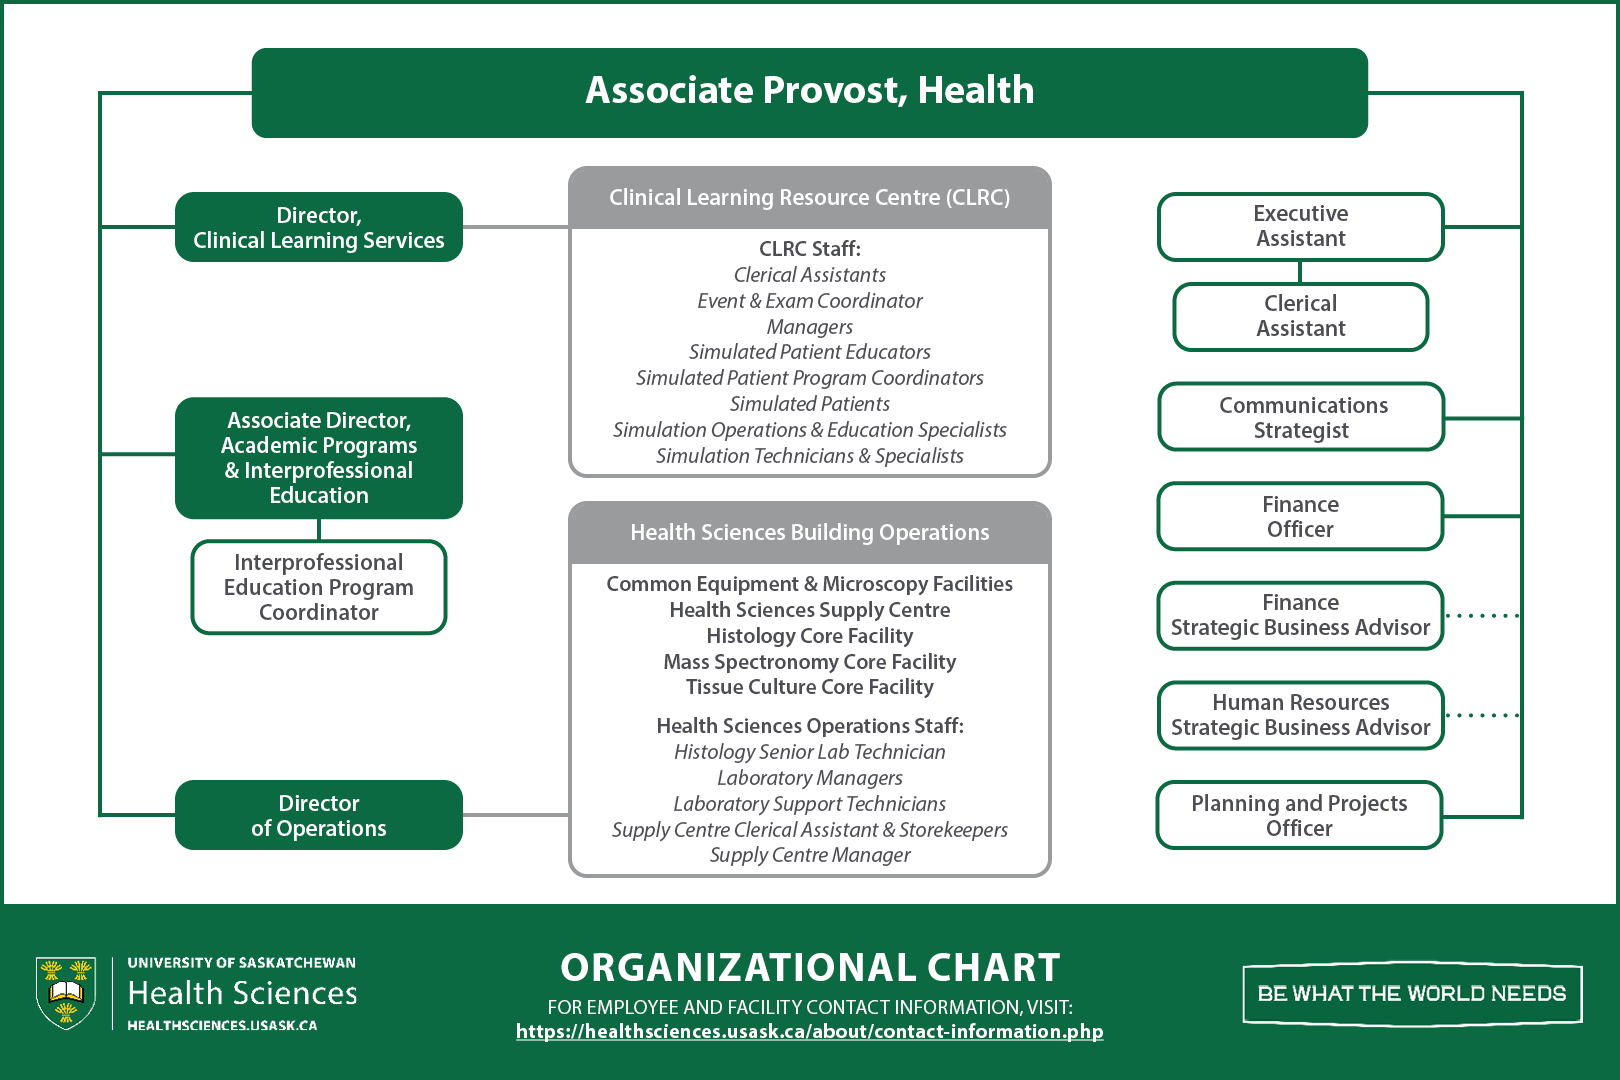 Organizational chart of the USask Health Sciences